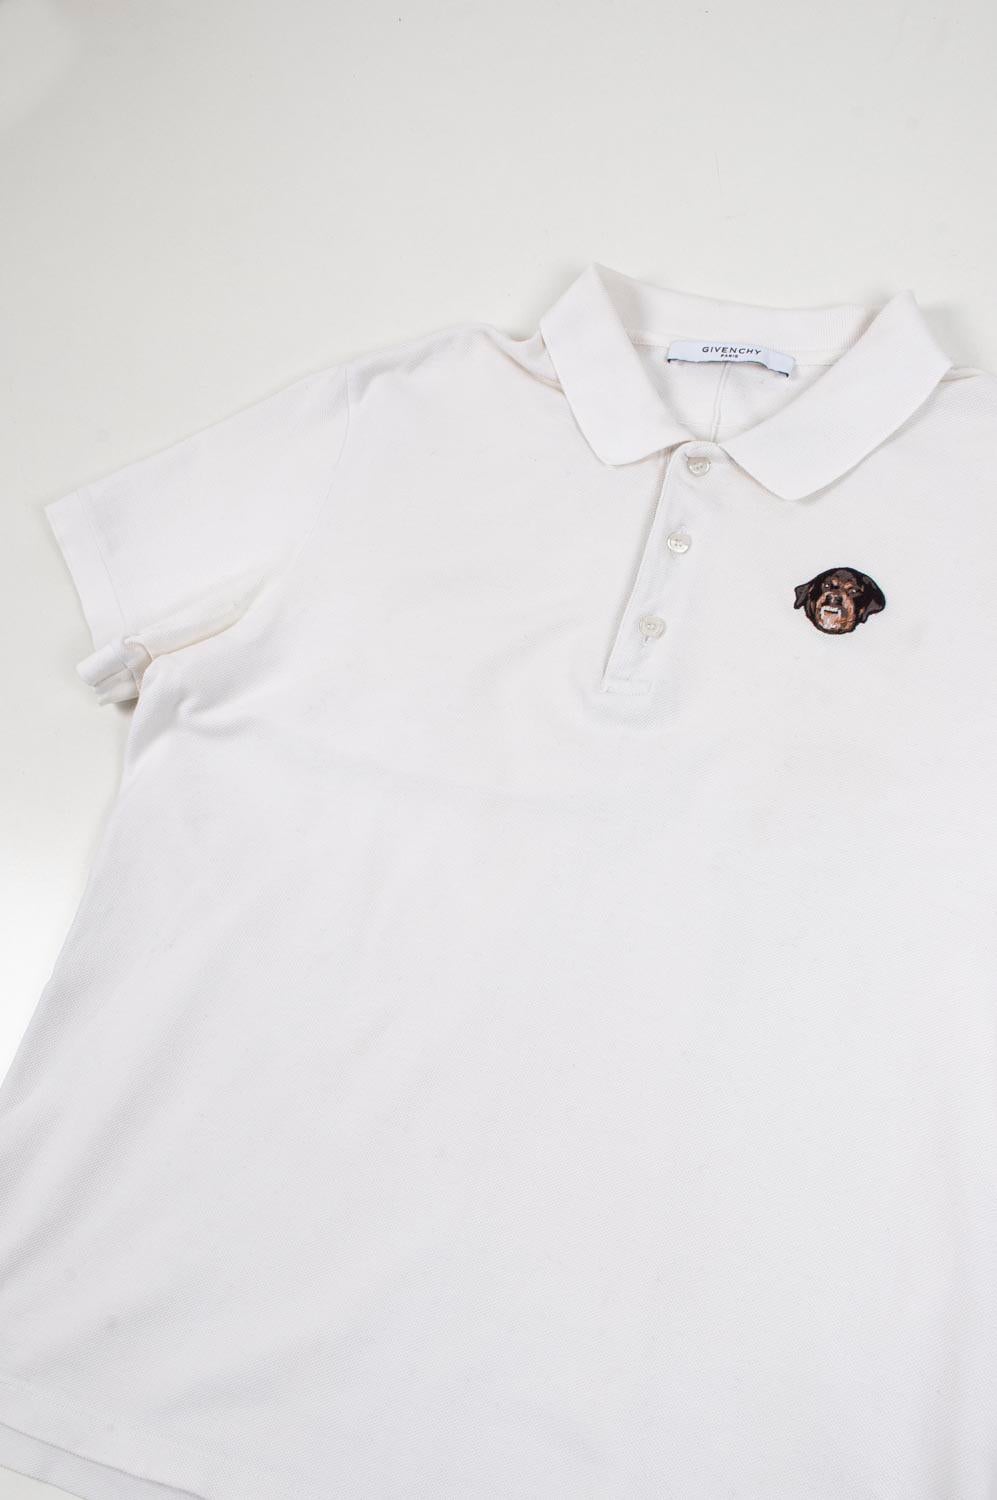 Gray Givenchy Rottweiler Men Polo Shirt Top Size XL, S300 For Sale